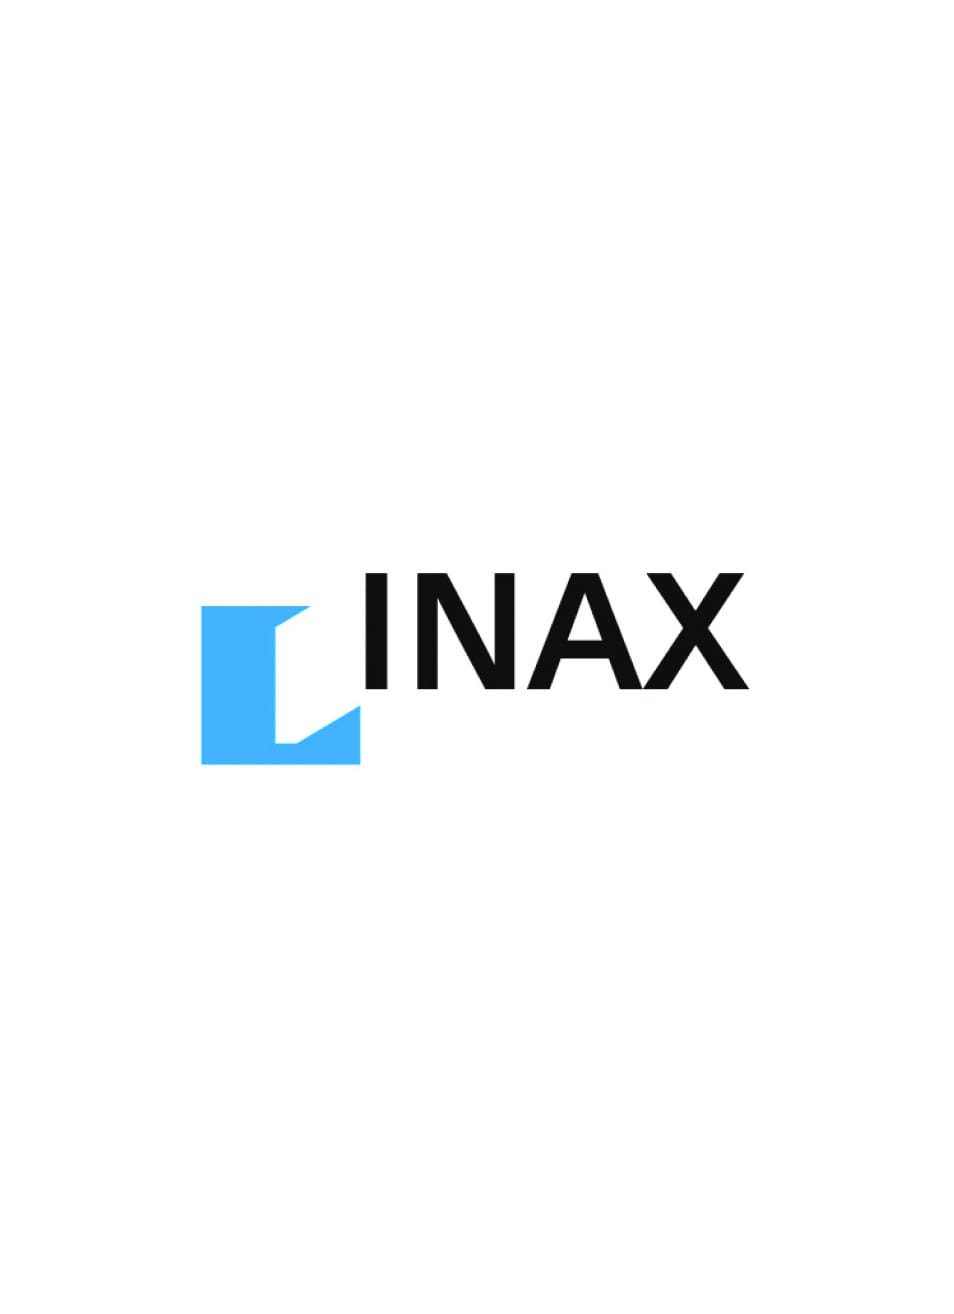 Change of company name to INAX Corporation.